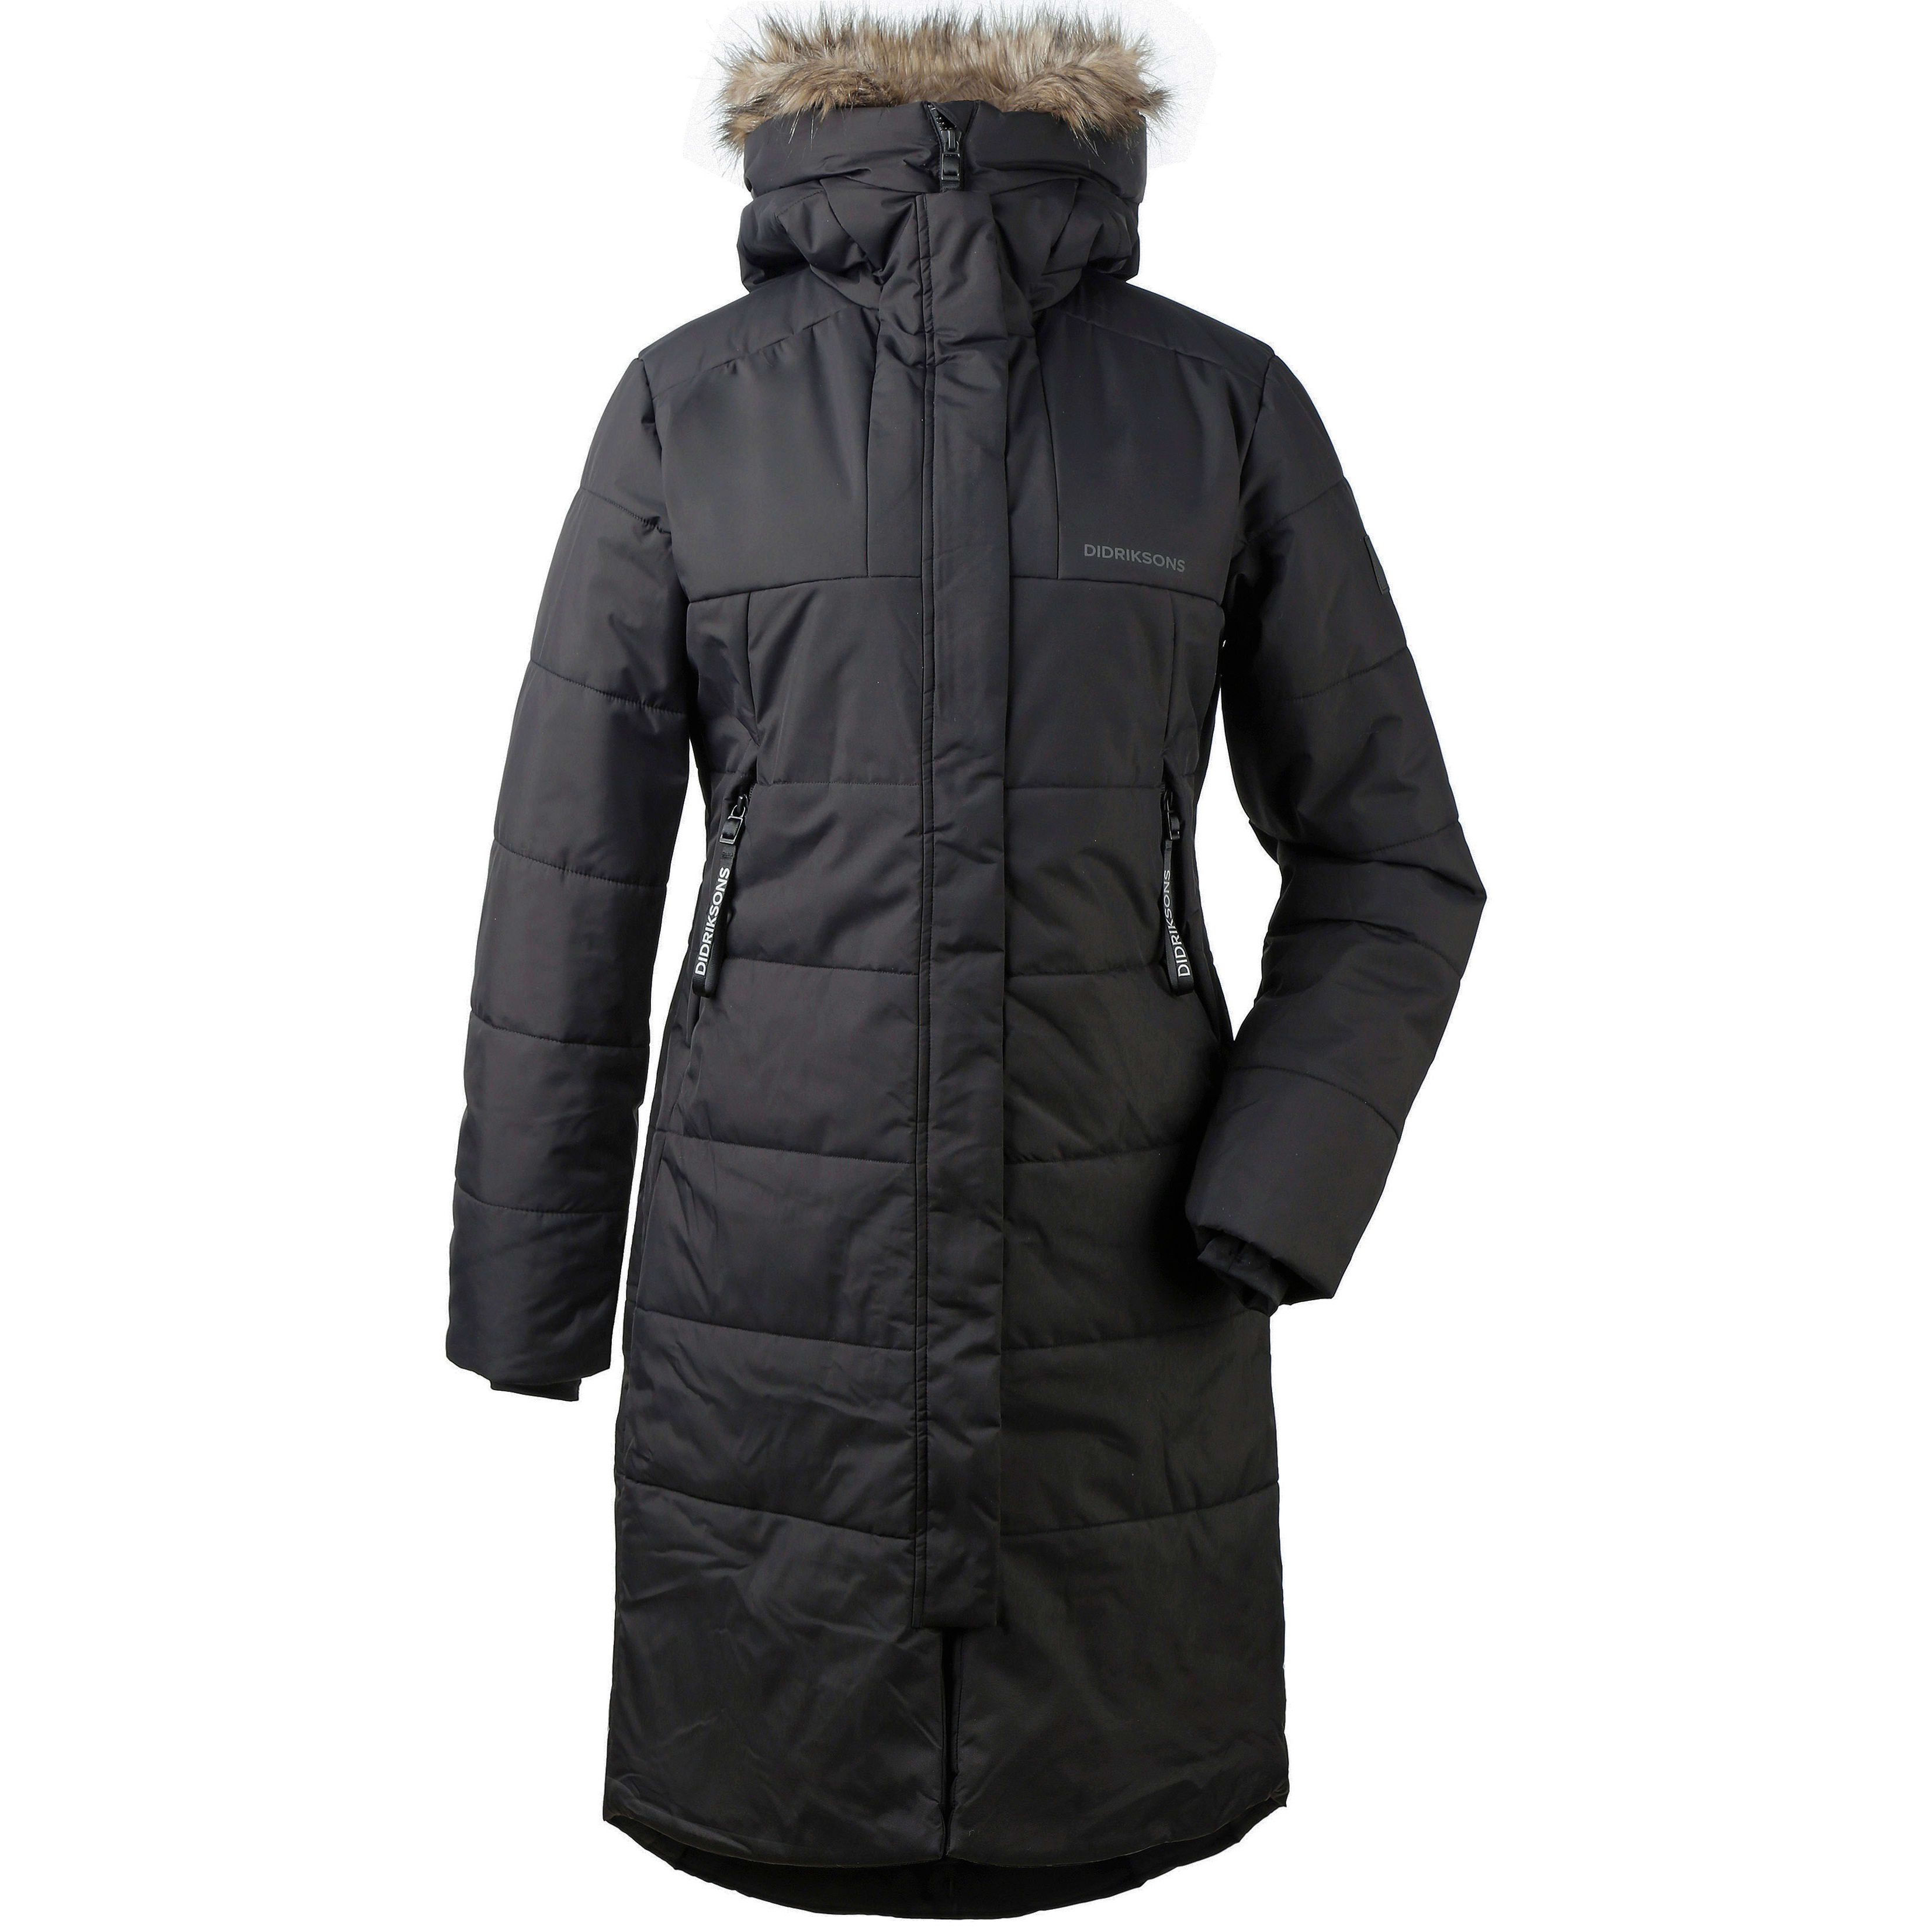 Buy Didriksons Valentina Women's Parka from Outnorth